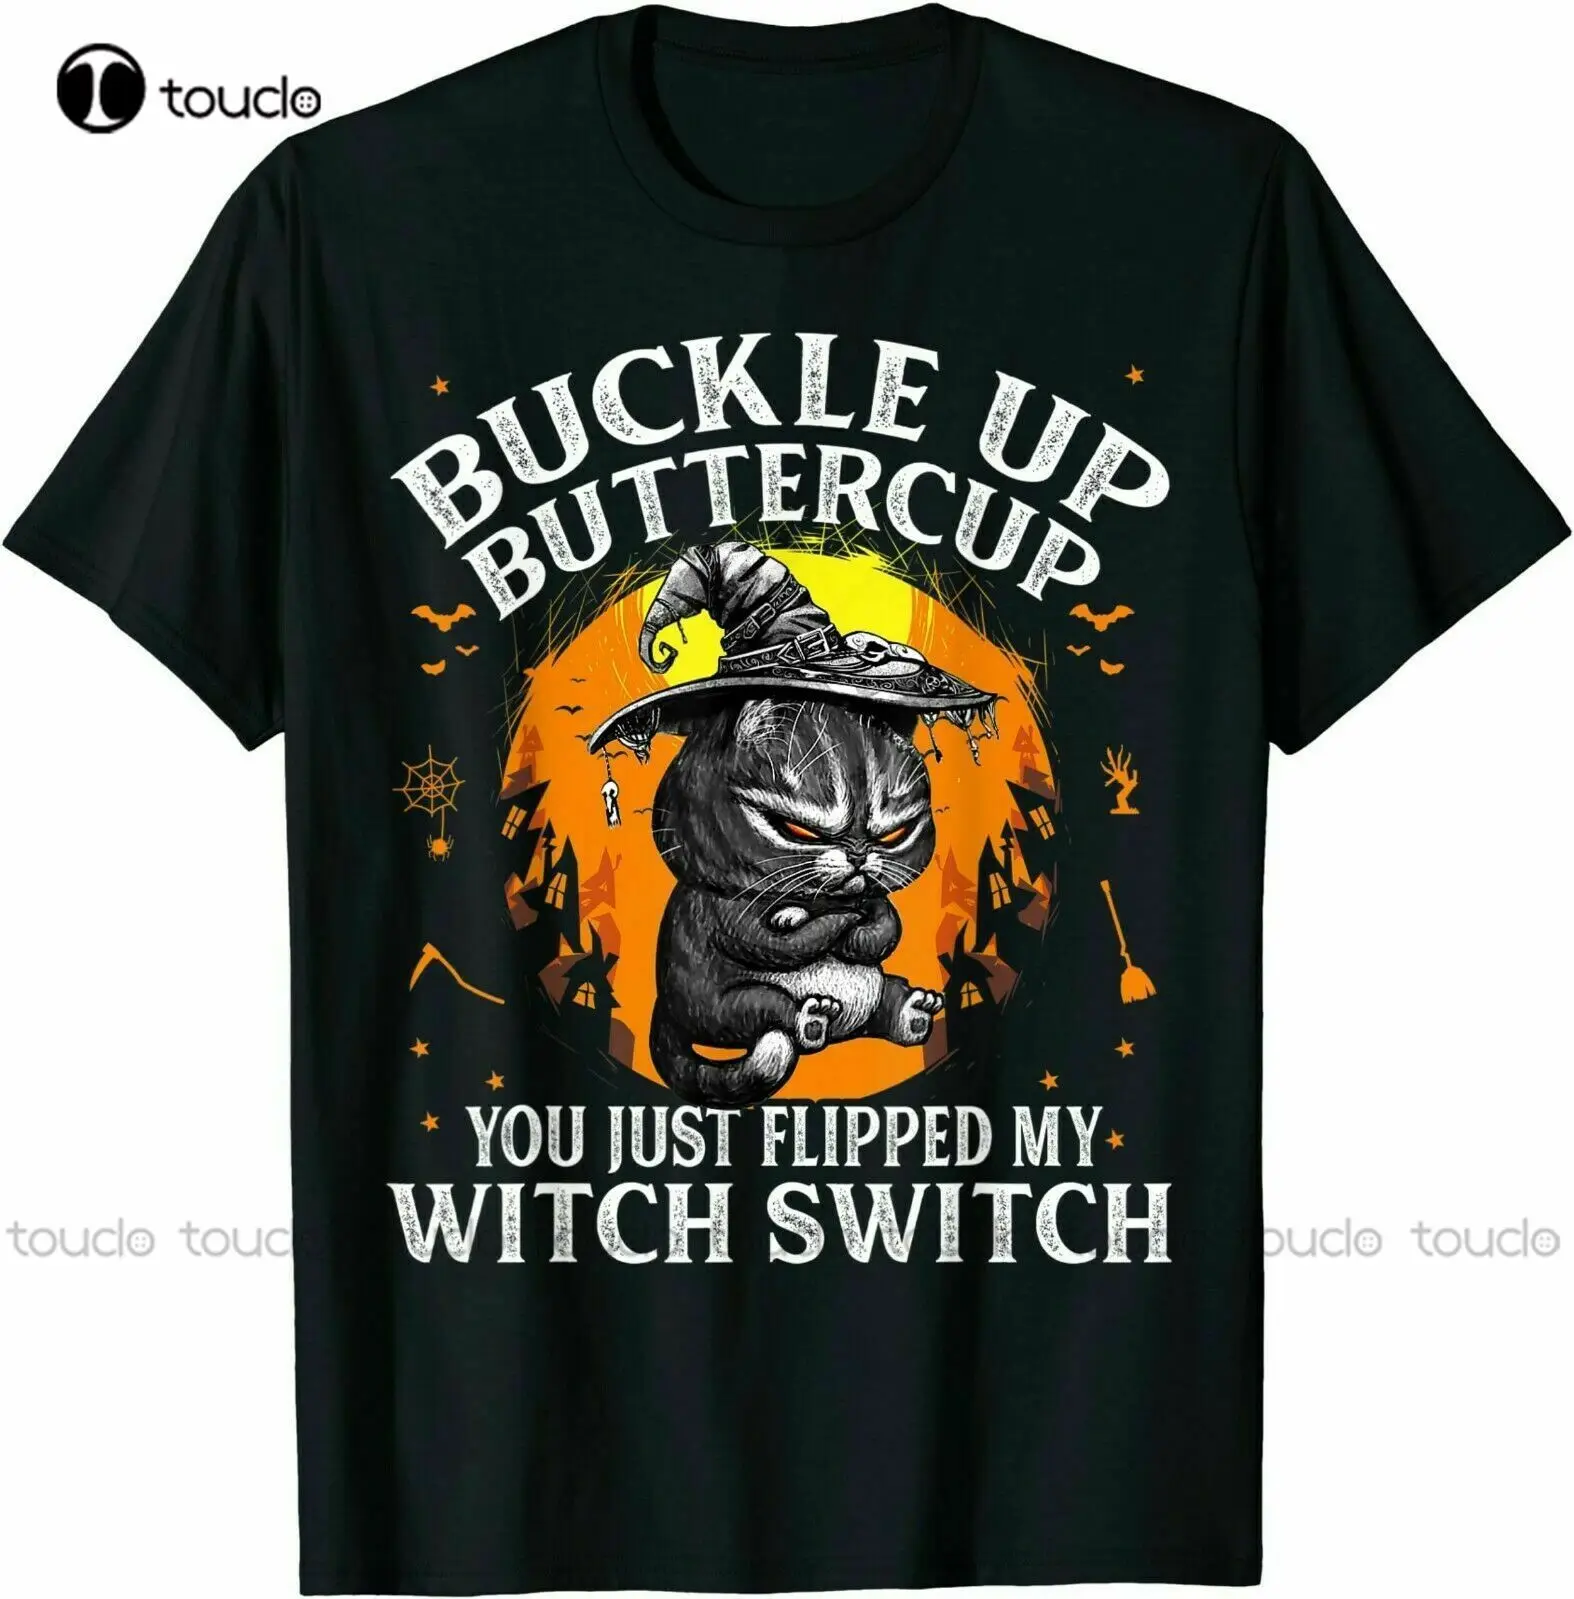 

New Cat Buckle Up Buttercup You Just Flipped My Witch Switch - Funny T-Shirt Mens Pink Shirt